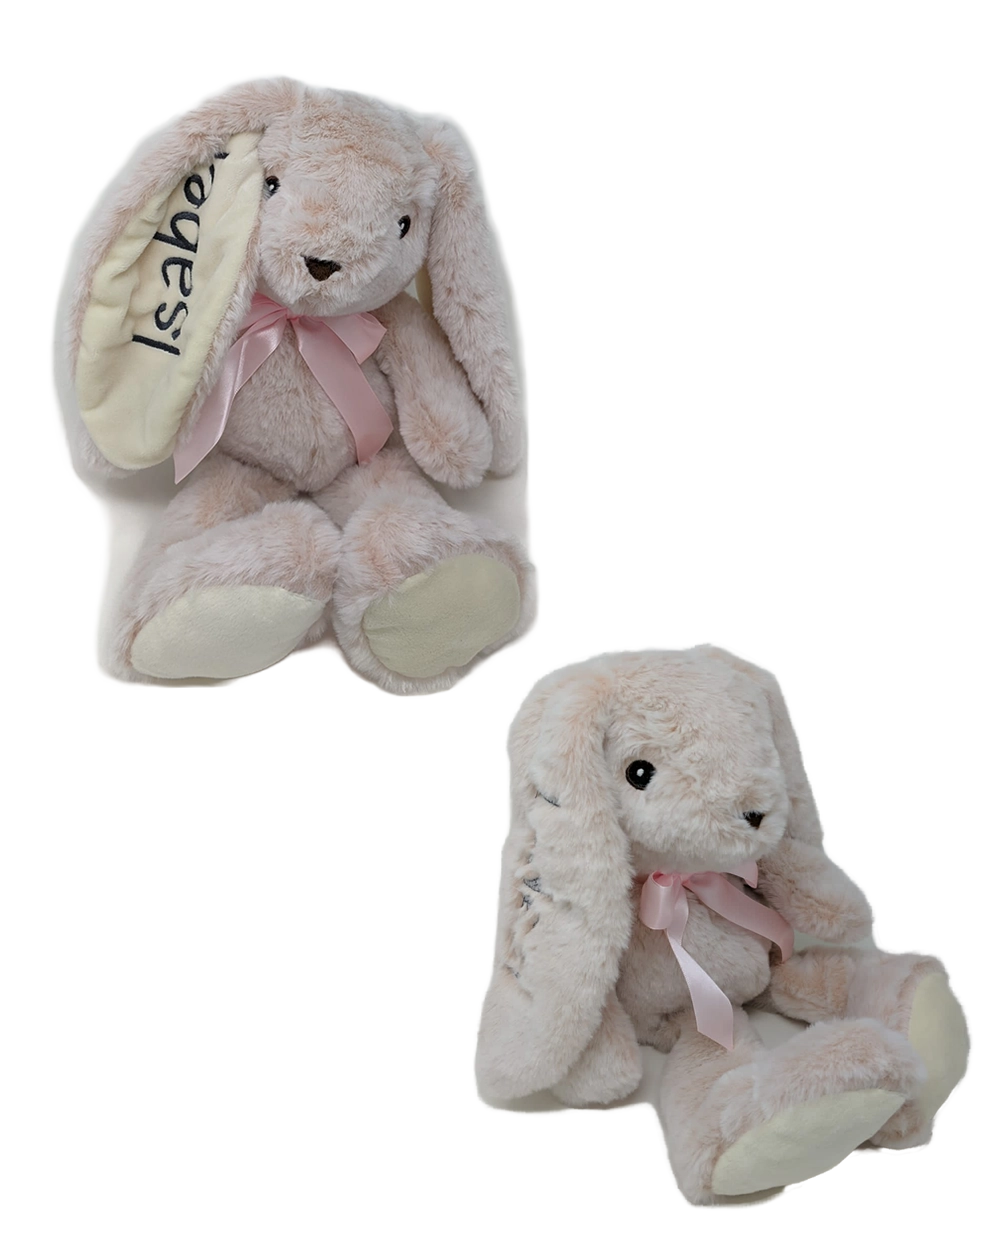 Personalized Stuffed Animal - Long Ear Bunny in Pink - You Name It Baby!